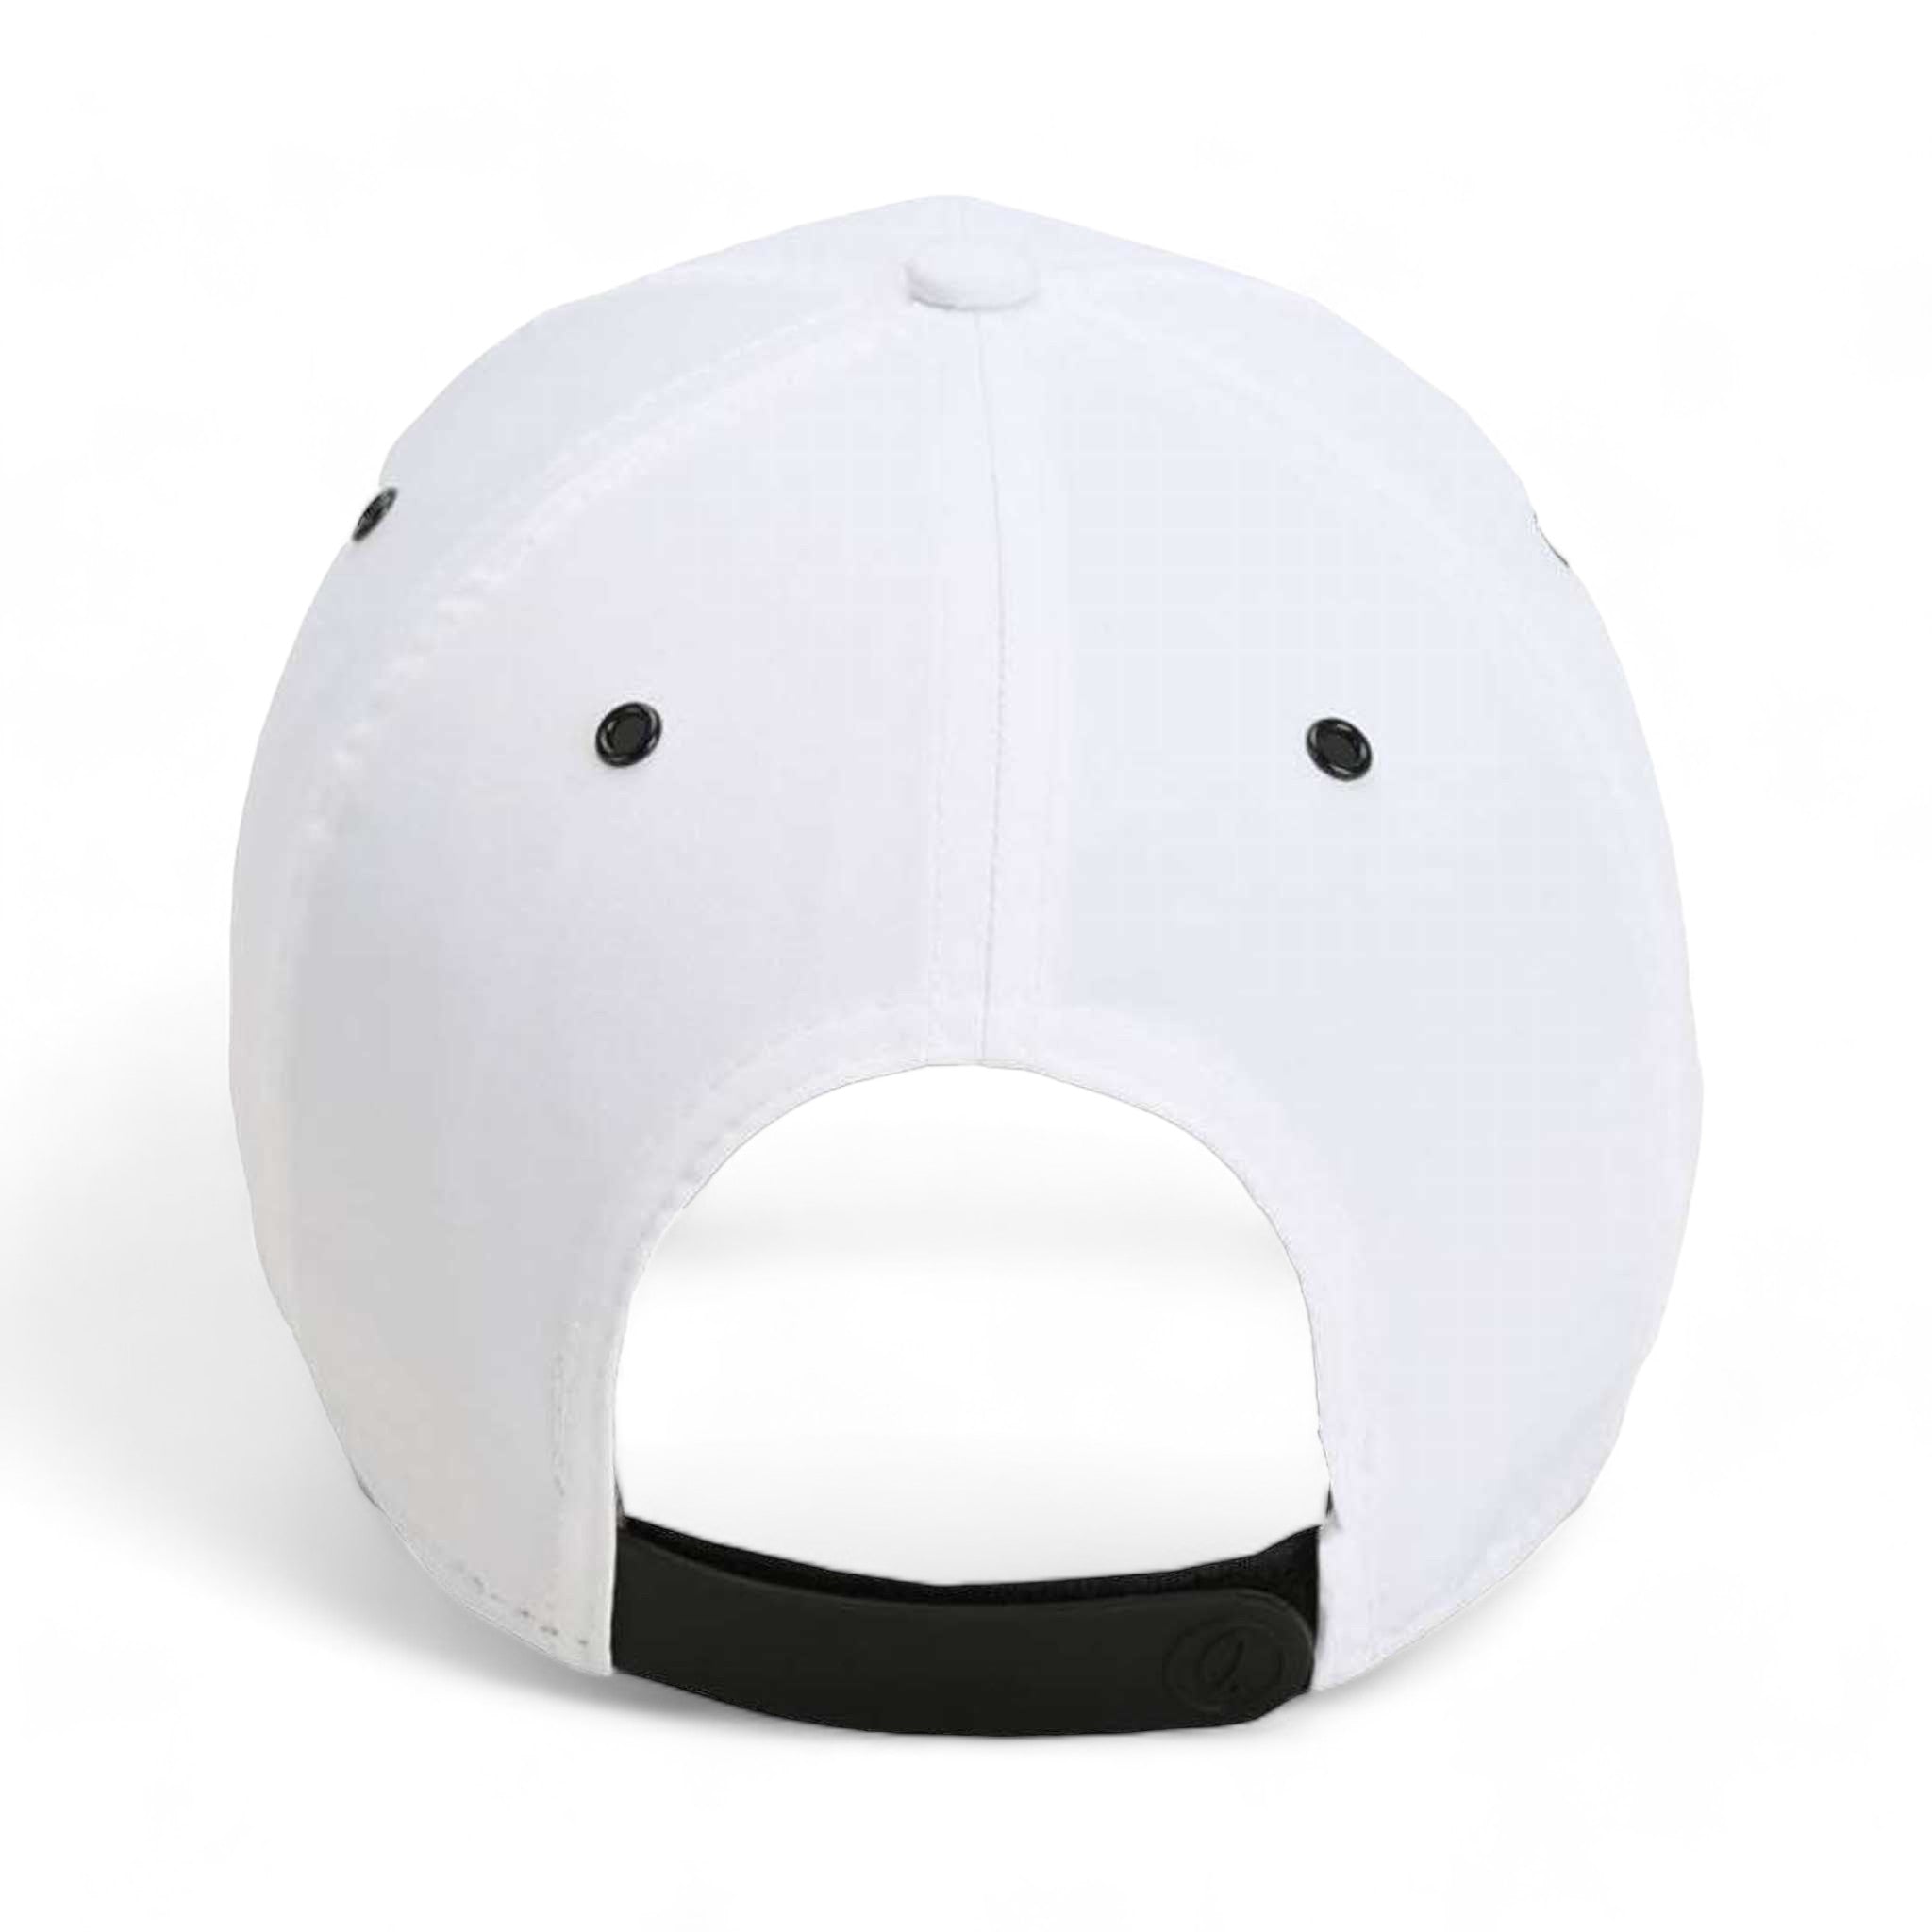 Back view of Imperial 6054 custom hat in white